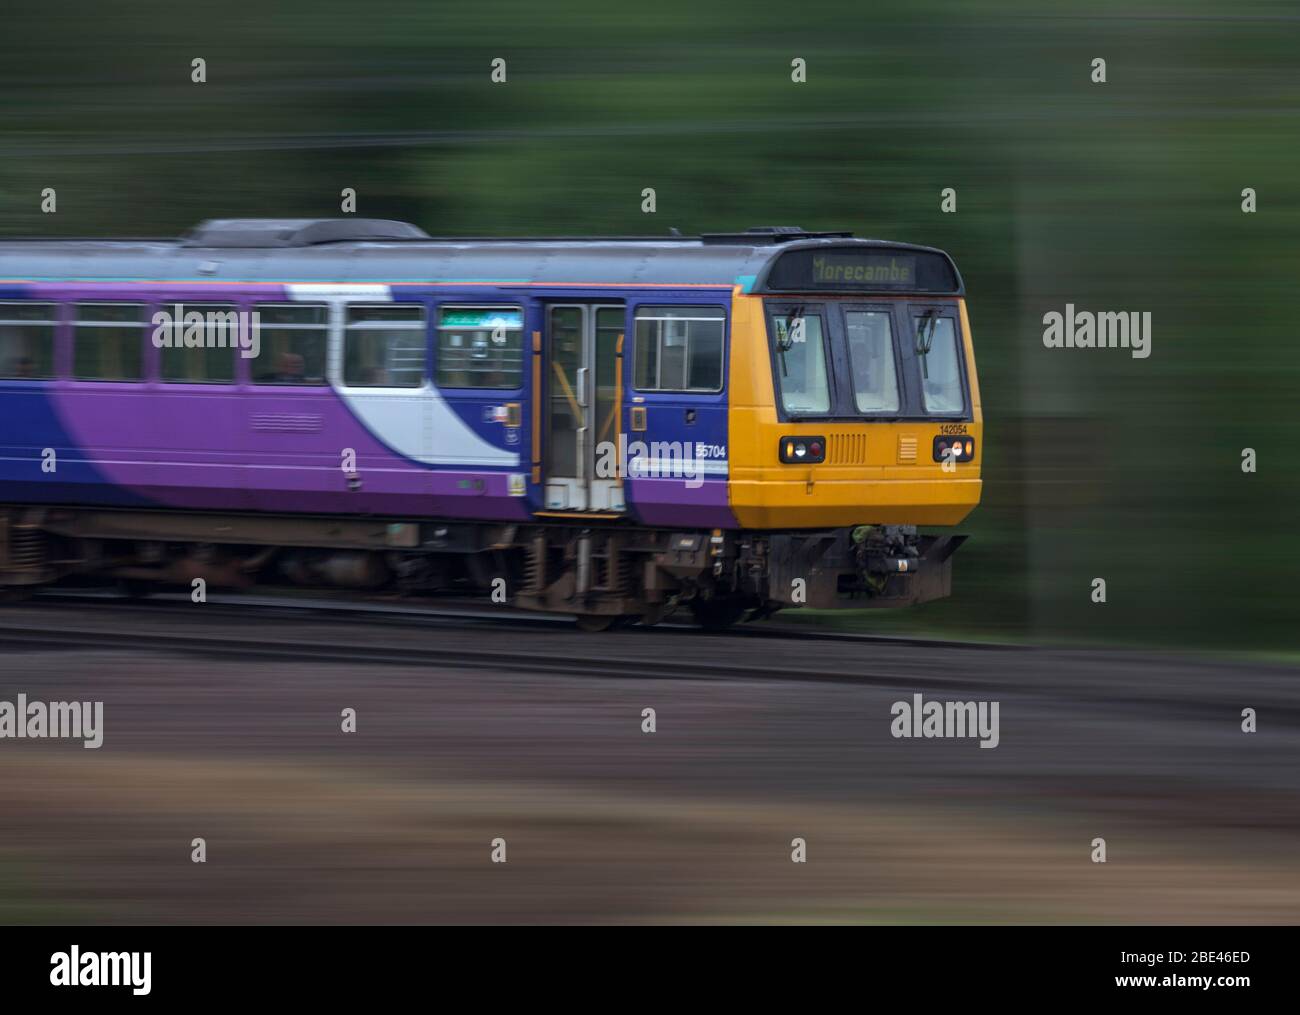 Northern Rail / Northern Trains  class 142 pacer train panned at speed on the west coast mainline Stock Photo